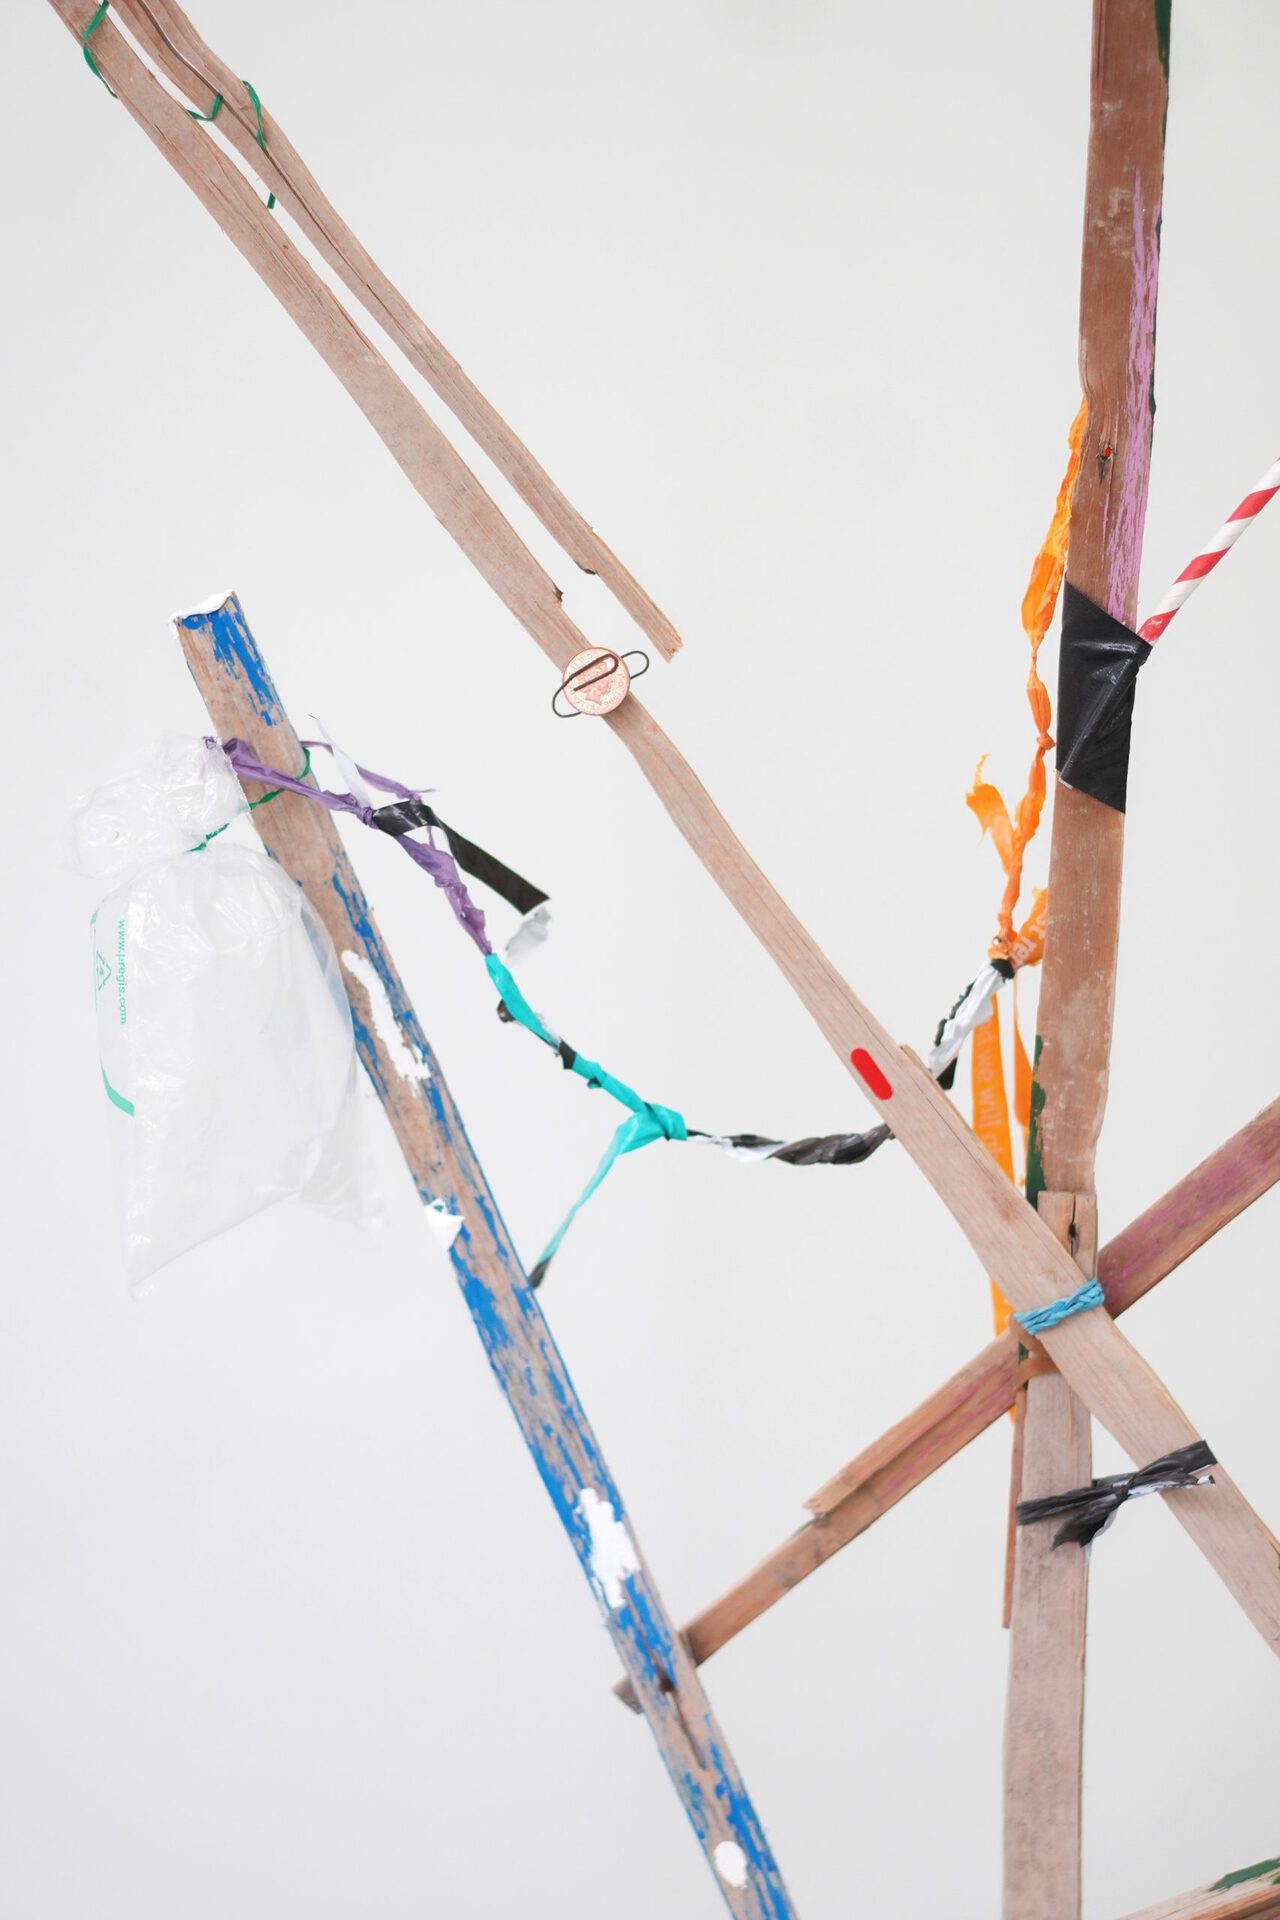 Ilona Balaga, Passerby (detail), 2021, found wood, concrete, acrylic paint, plastic bags, 1p, tree branch, acorn, metal hanger, pull-tab, snail, string, rubber bands, gaffer tape, newspaper, straw, metal wire, sewing thread, peach kernel, paperclip, 195/70/27 cm